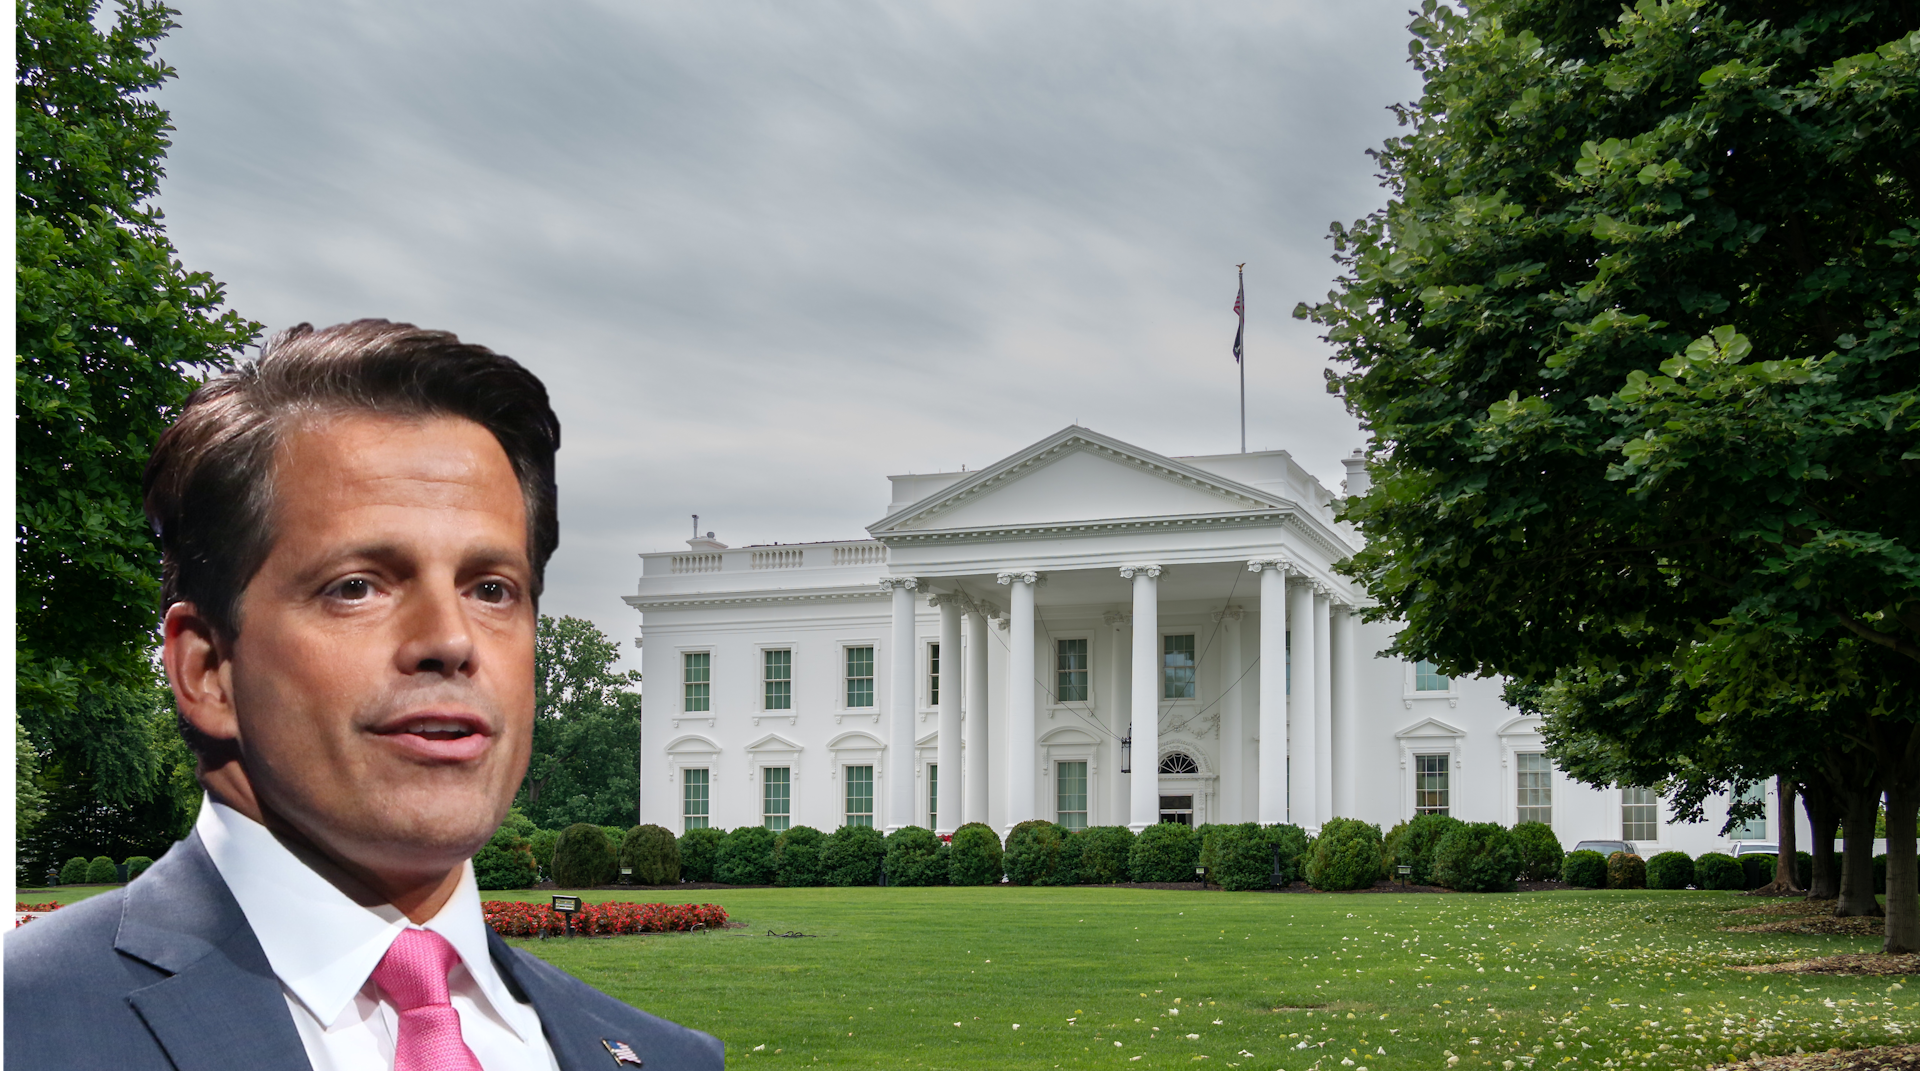 Anthony Scaramucci’s ‘total humiliation’ and what it taught him